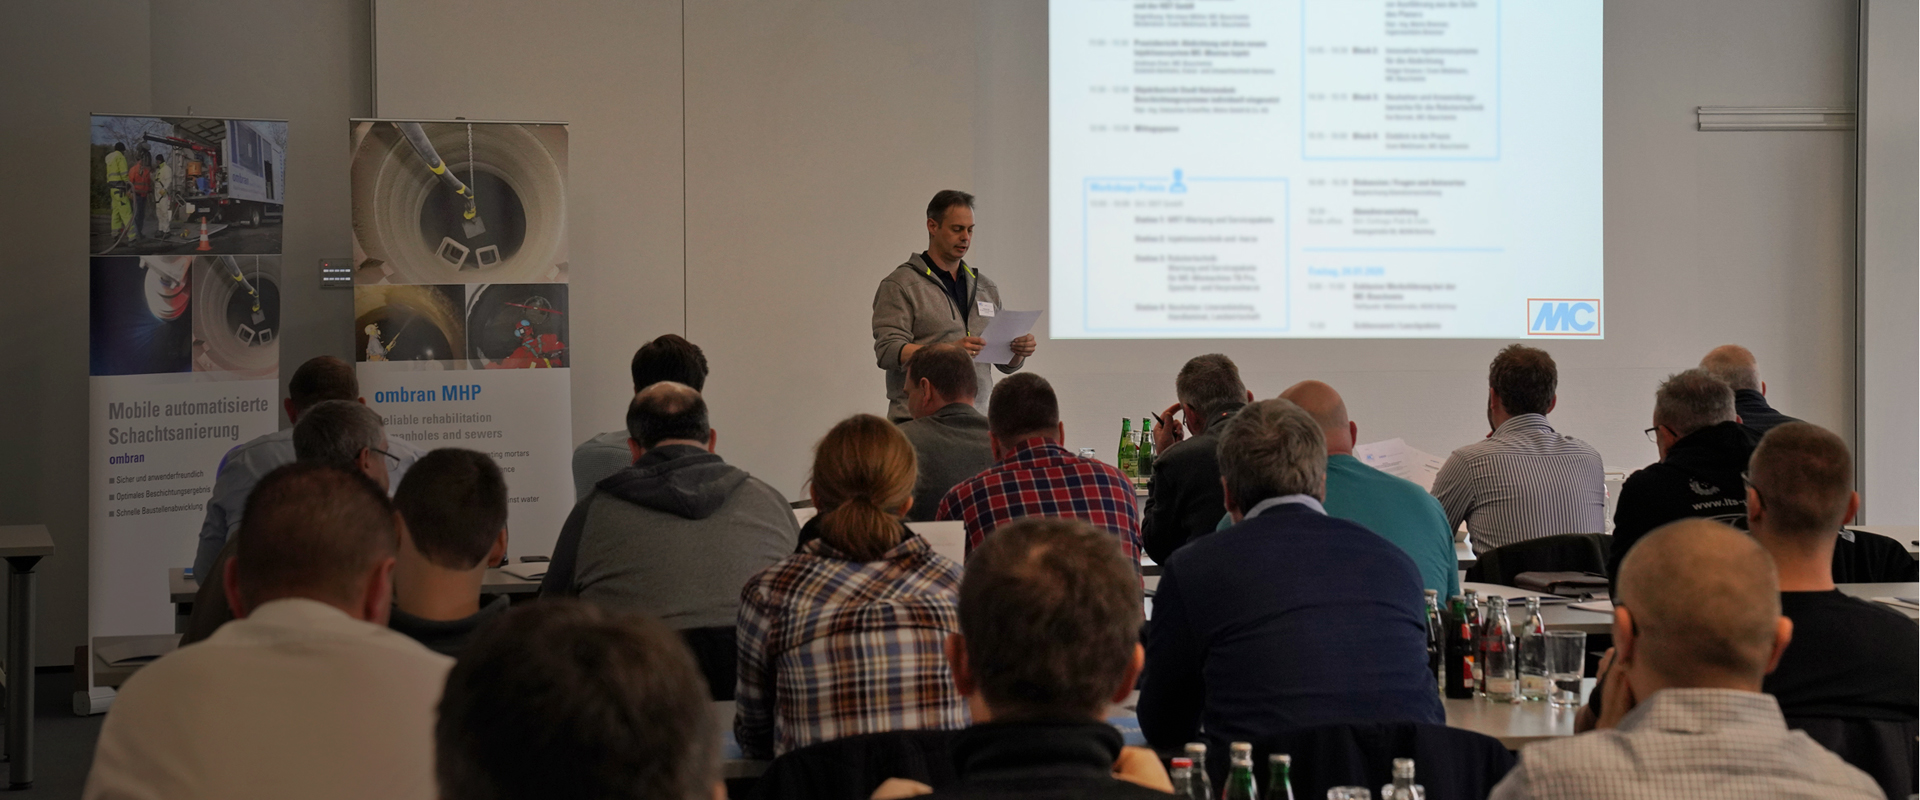 On 23 and 24 January 2020, the ombran division of MC-Bauchemie held the third Ombran Conference at MC-Bauchemie's training centre in Bottrop.